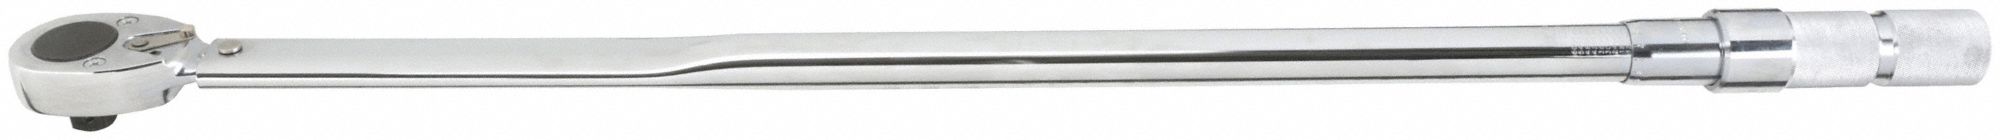 PROTO, Foot-Pound, 3/4 in Drive Size, Micrometer Torque Wrench 426F16| J6018AB Grainger